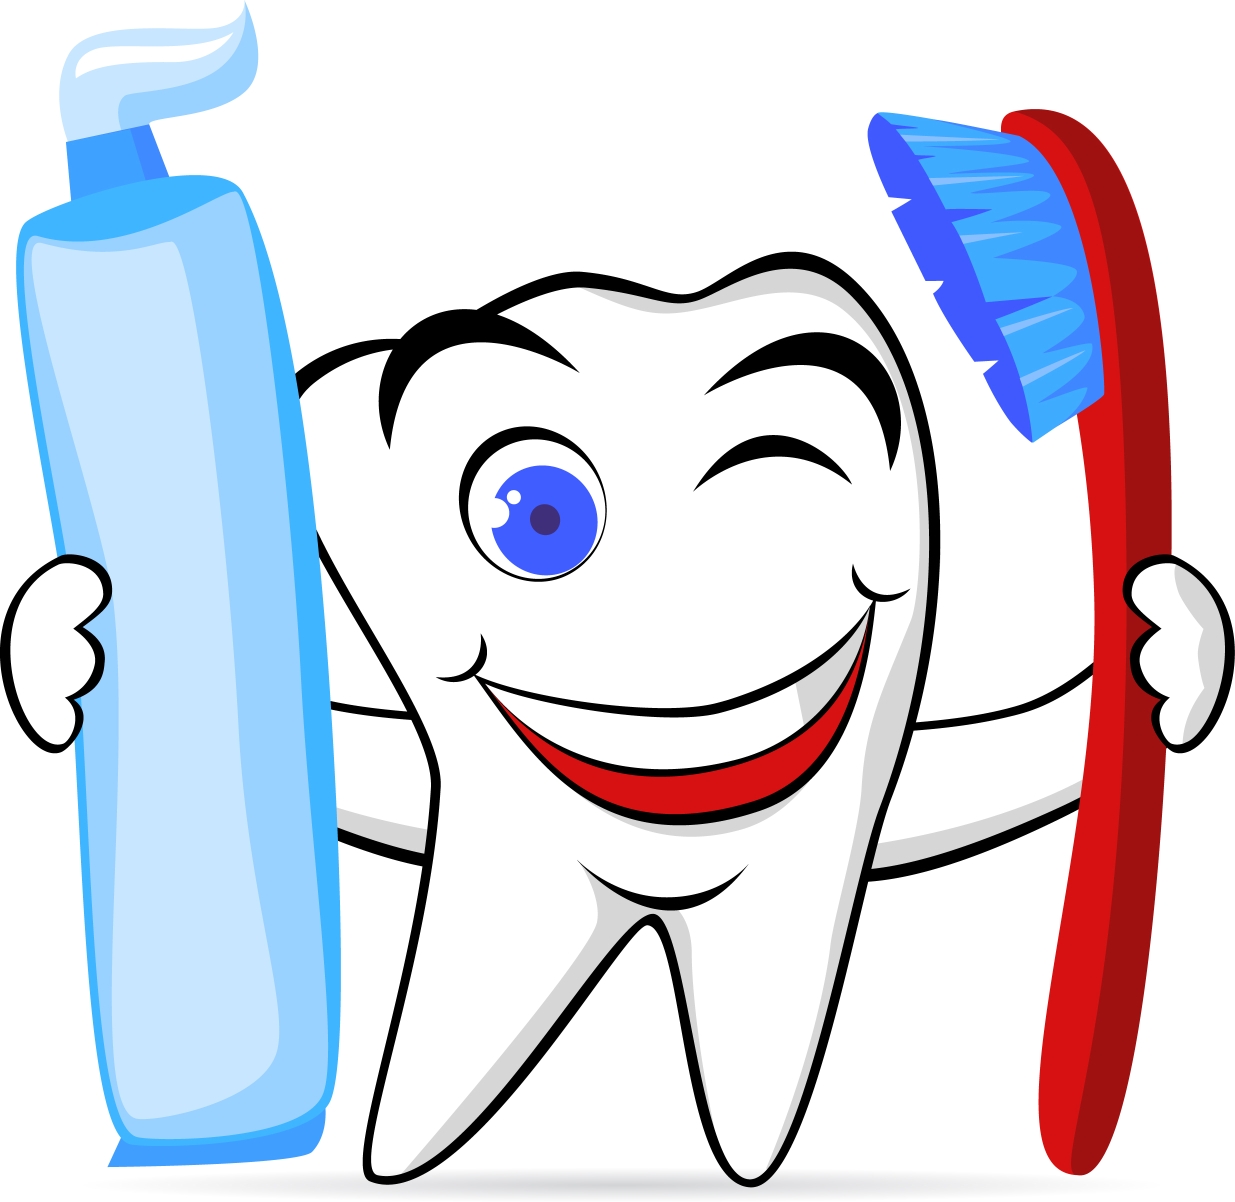 Tooth mouth with teeth clipar - Tooth Clipart